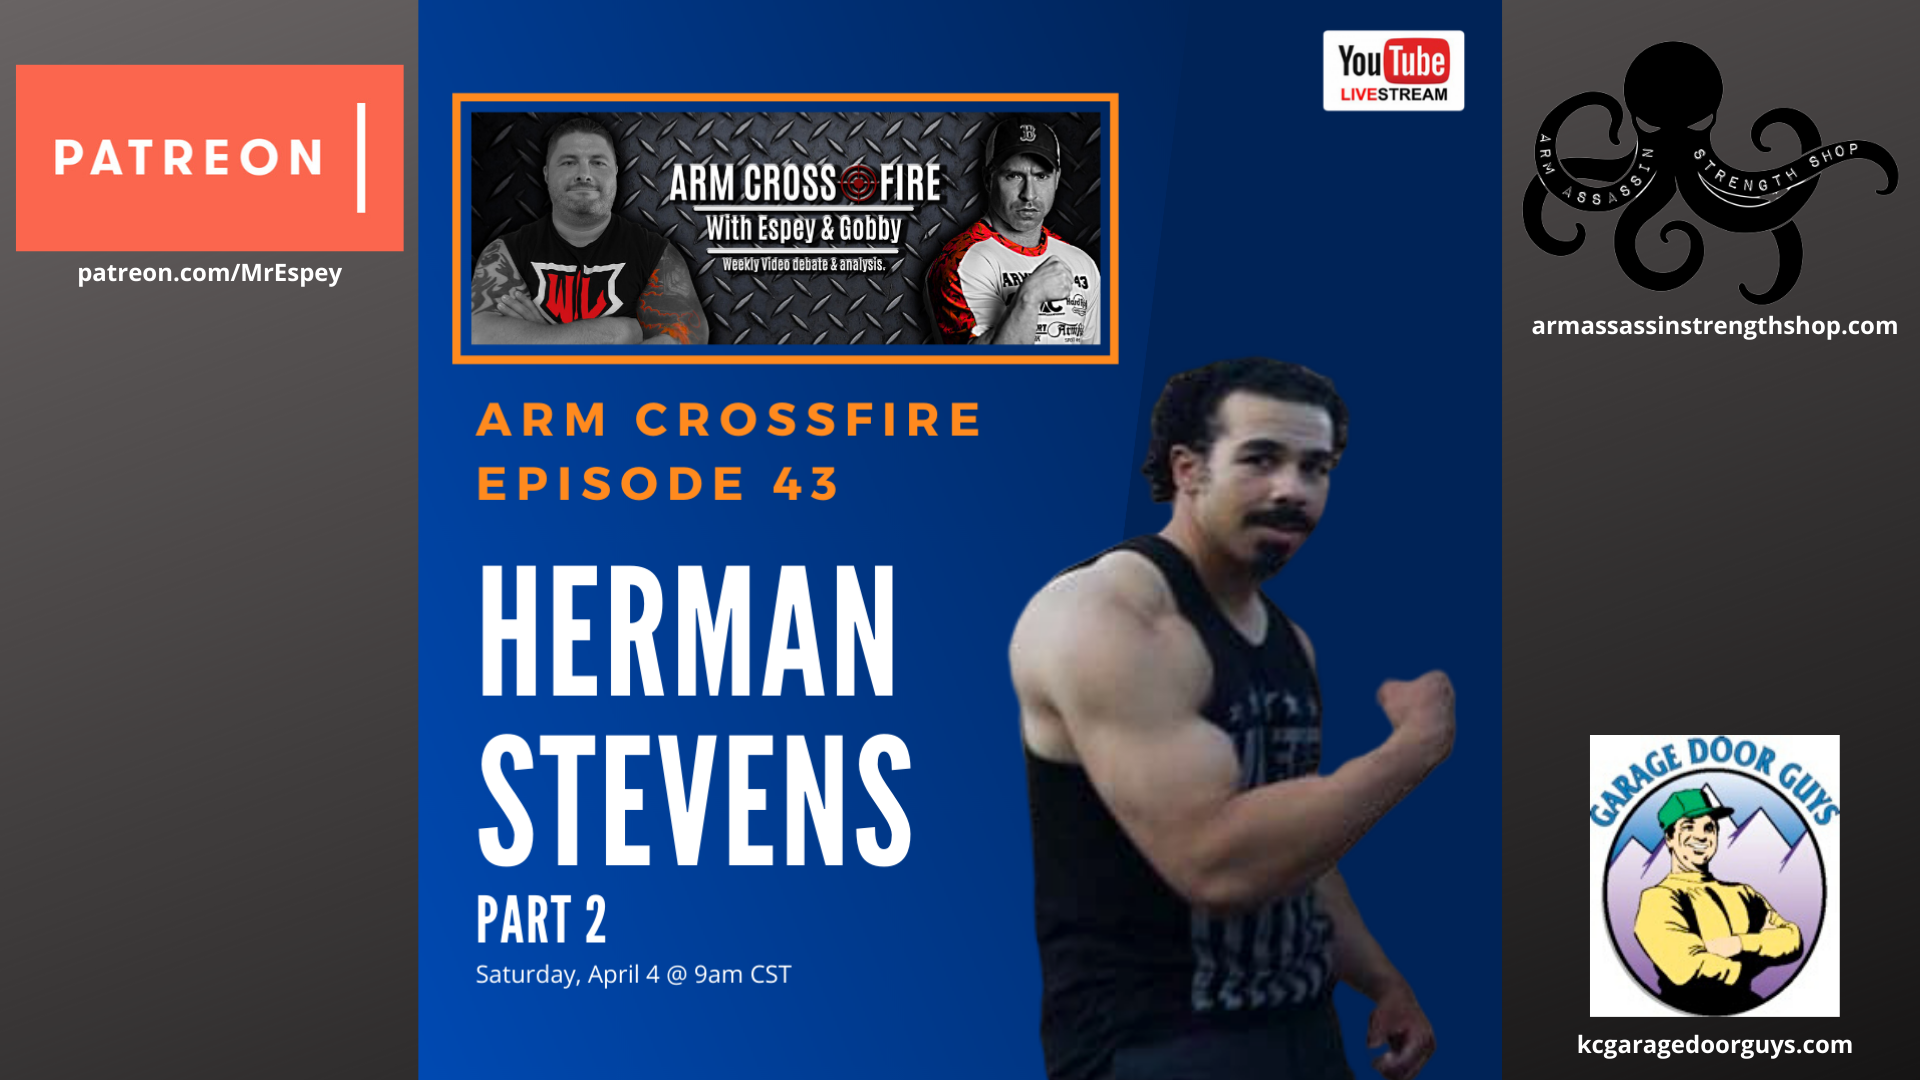 Arm Crossfire 43 - YouTube LIVE with Herman Stevens - Part 2